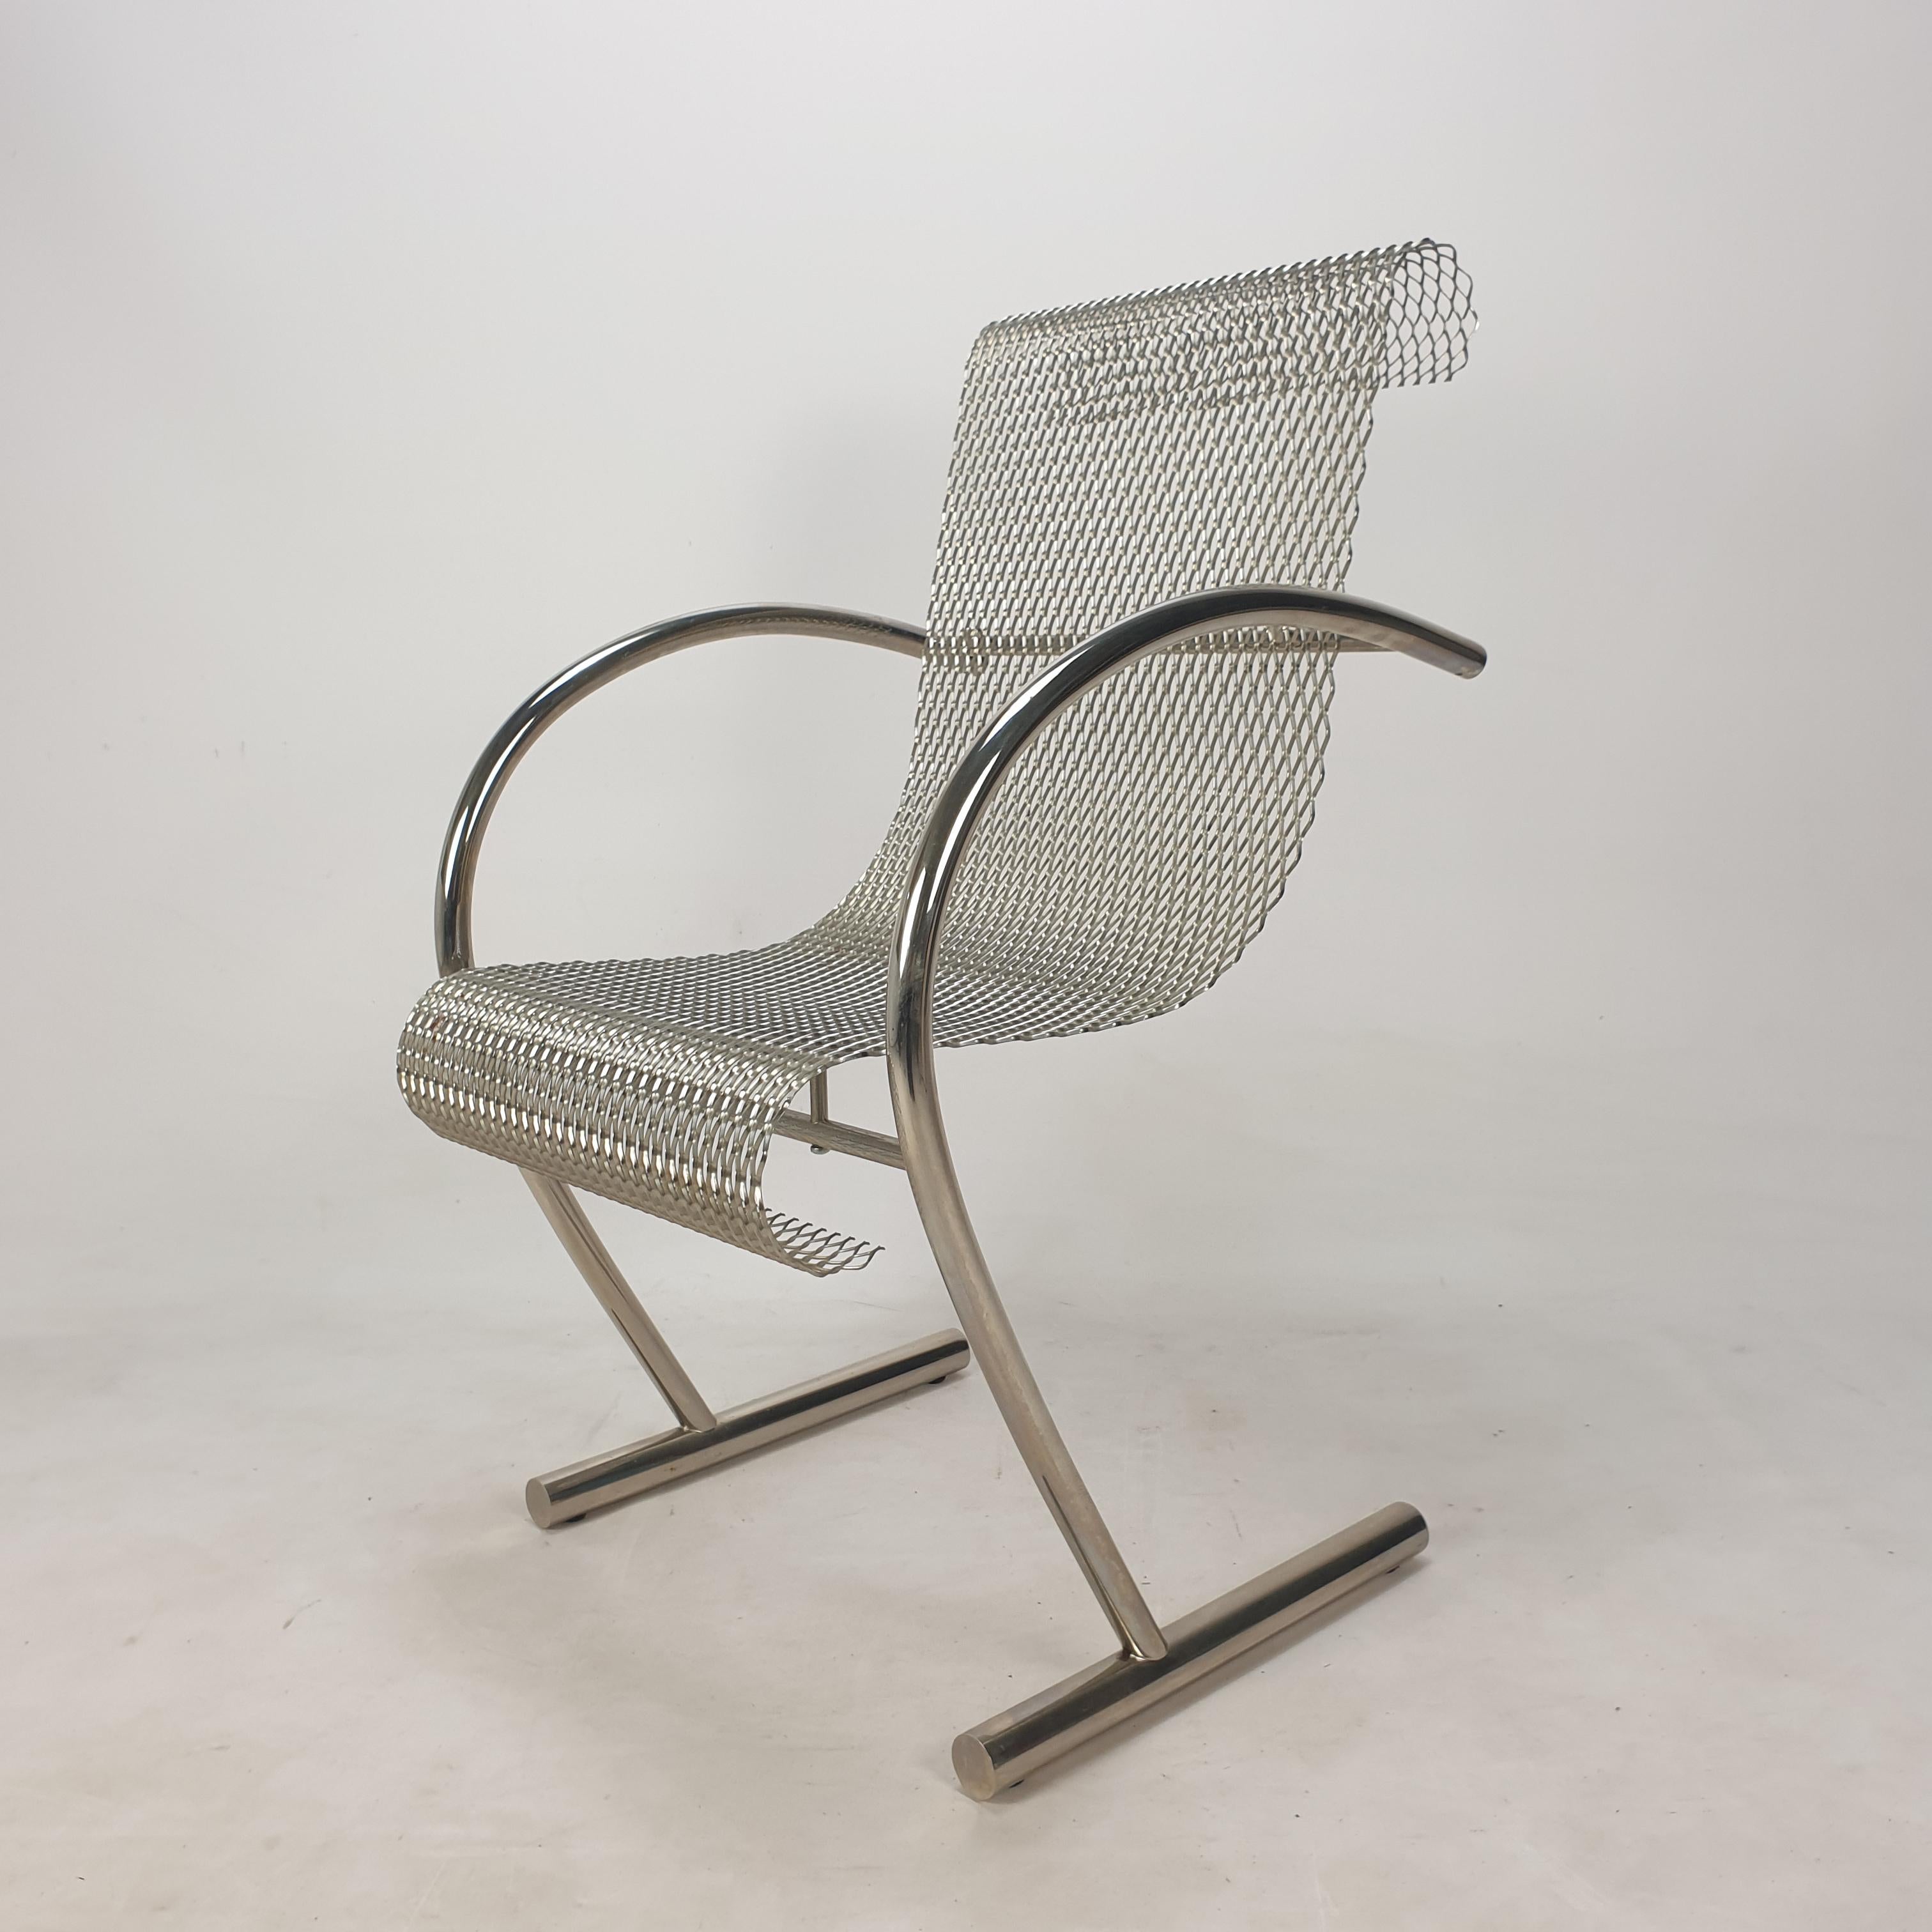 Beautiful Sing Sing Sing chair, designed by Shiro Kuramata and manufactured by XO, 1985.

The chair is crafted from tubular steel and expanded steel mesh. 
It is marked on a leg, see the picture.

Shiro Kuramata (1931-1991) created a fluid